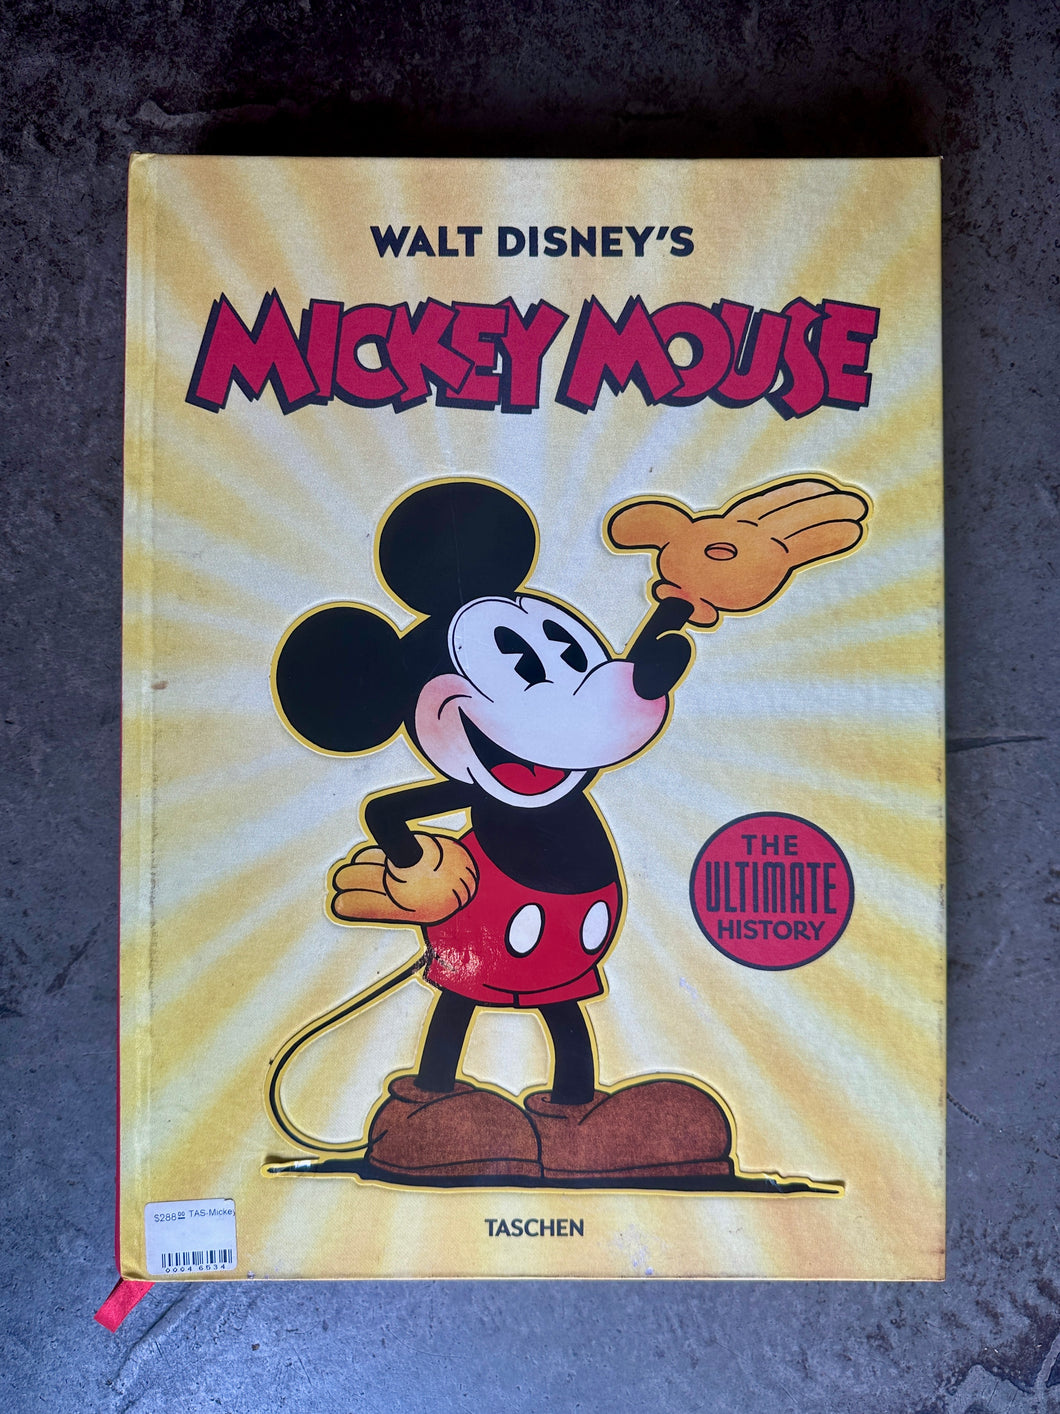 Walt Disney’s Mickey Mouse. The Ultimate History XXL Edition Taschen Hardcover Book